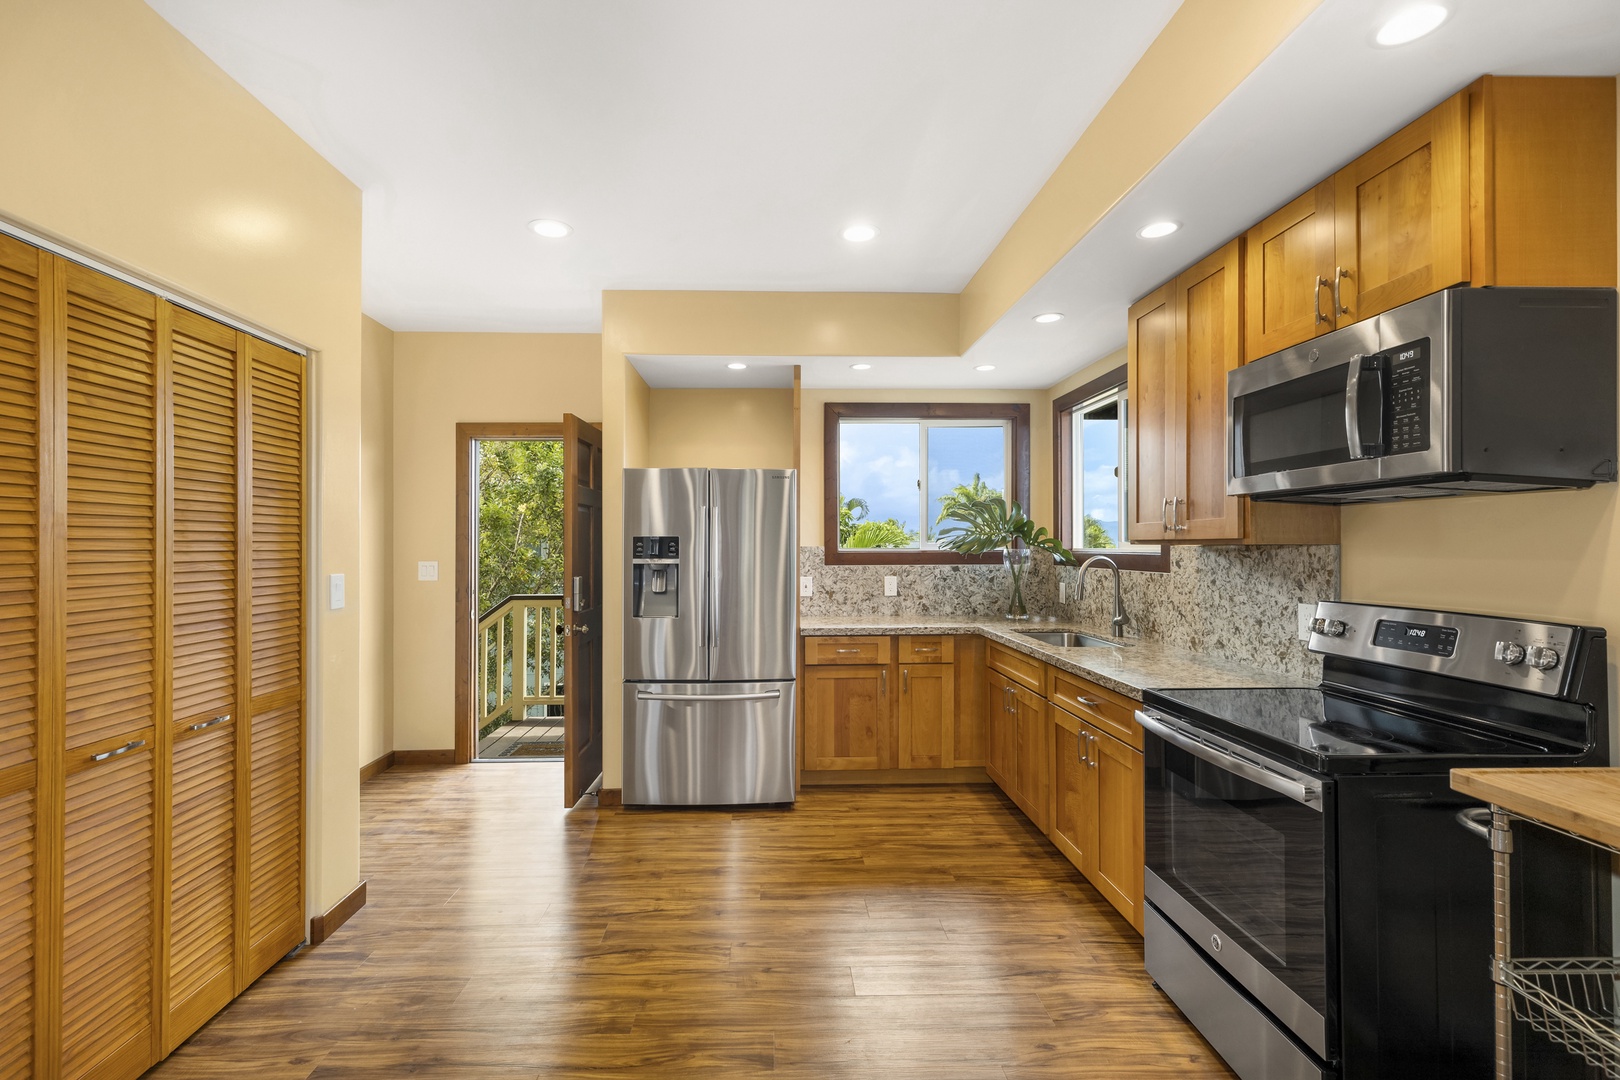 Haleiwa Vacation Rentals, Waimea Dream - The upstairs kitchen has modern finishes and a second entry door.